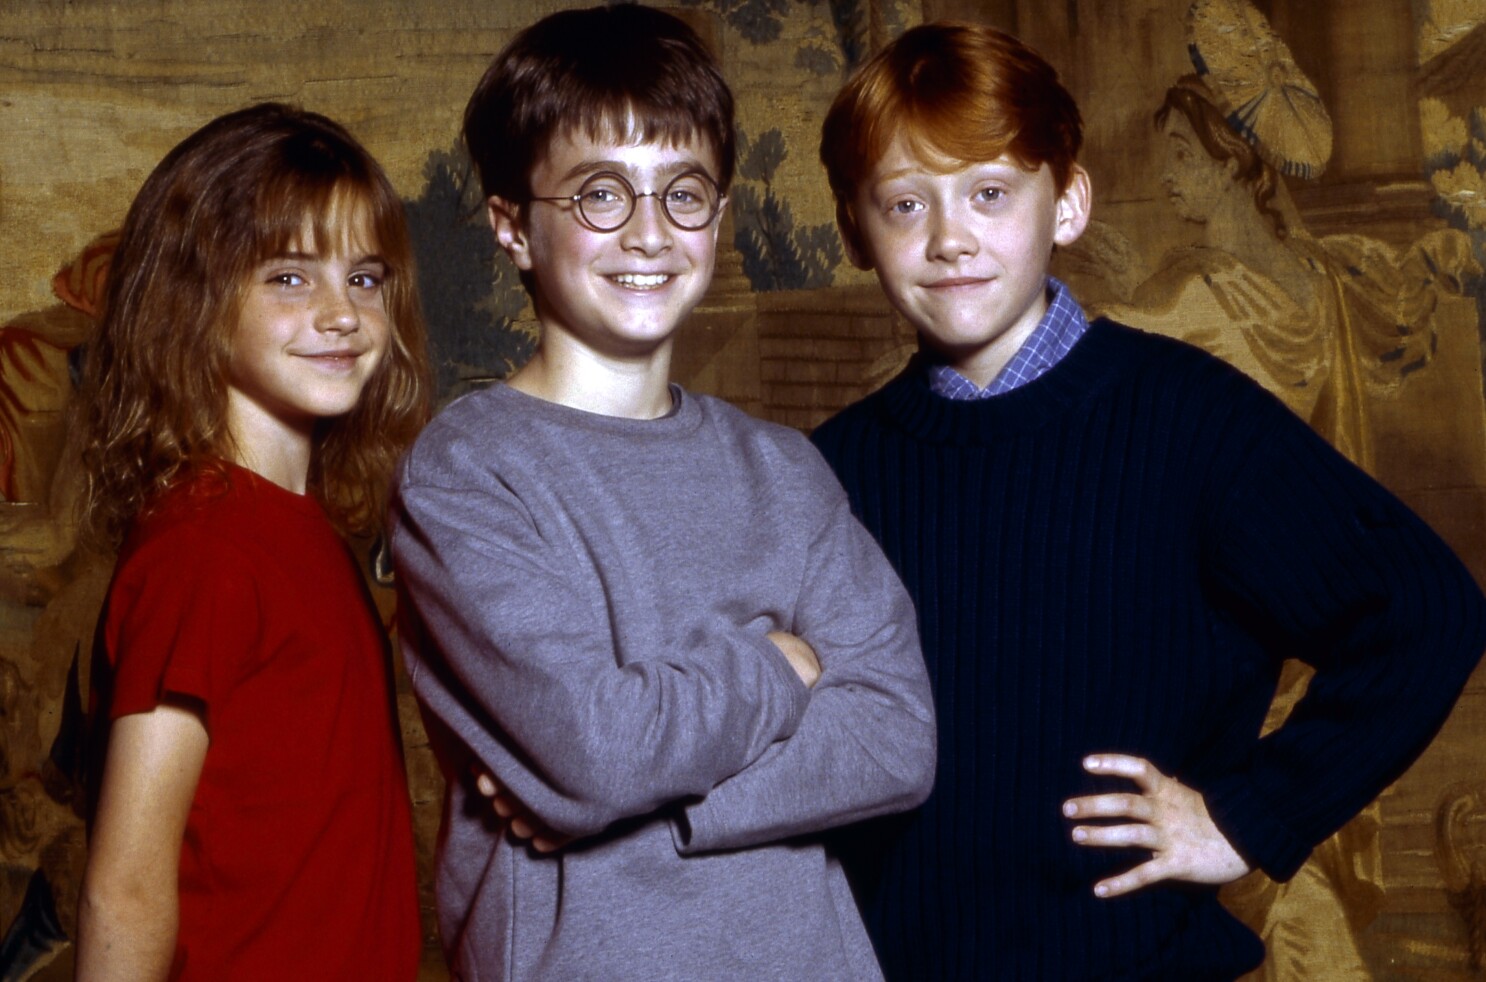 Harry Potter' special: J.K. Rowling won't be part of it - Los Angeles Times